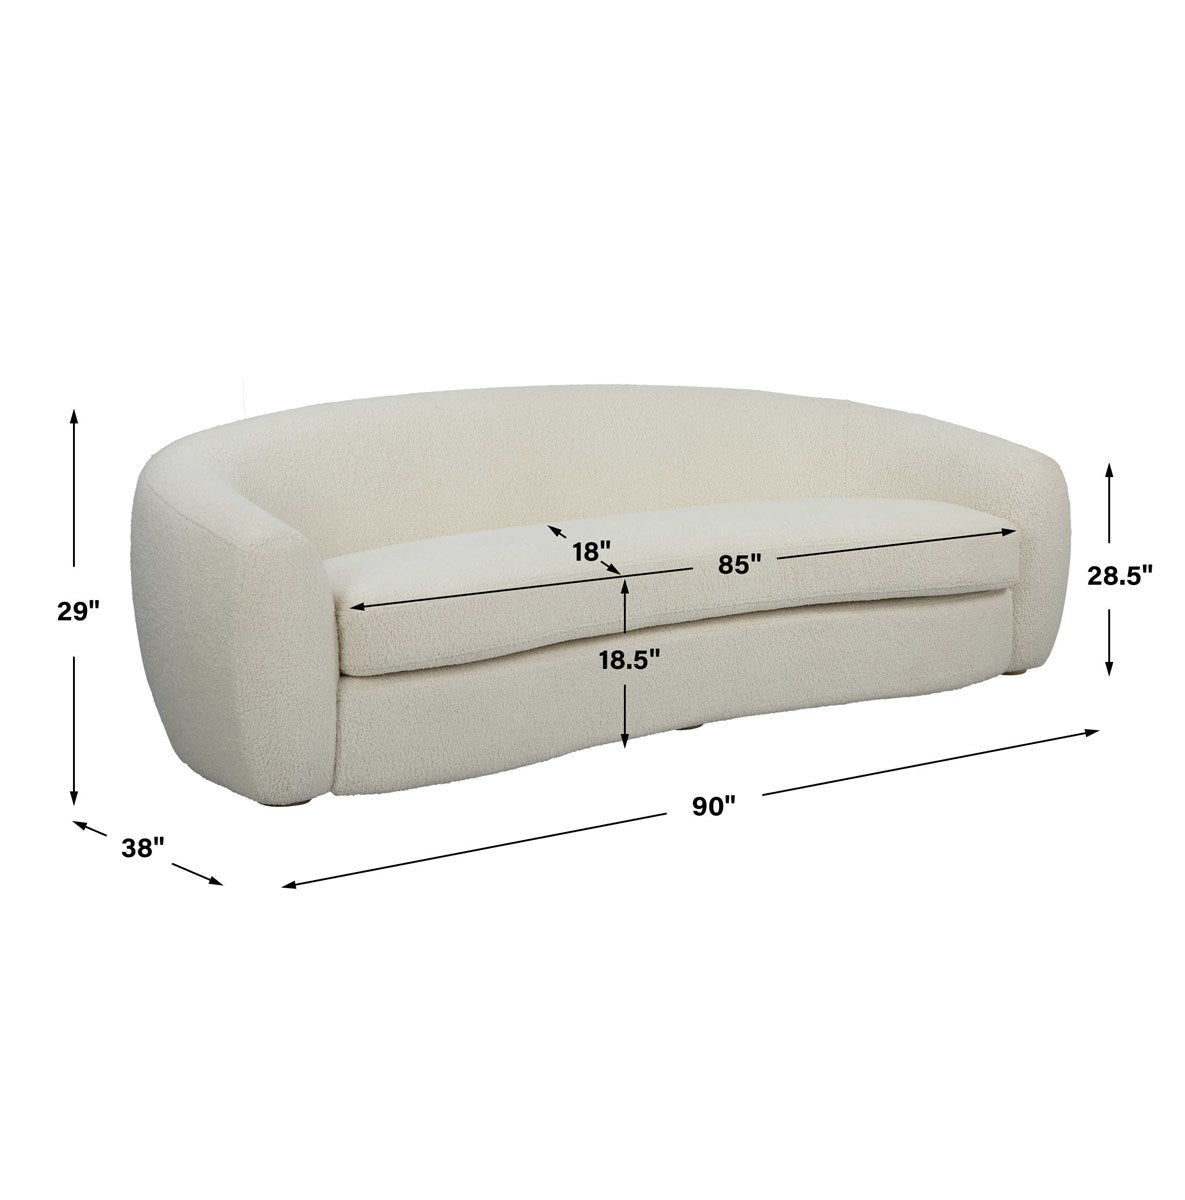 Measurement View. The Capra Sofa Draws Inspiration From Old Hollywood Glamour And The Art Deco Movem